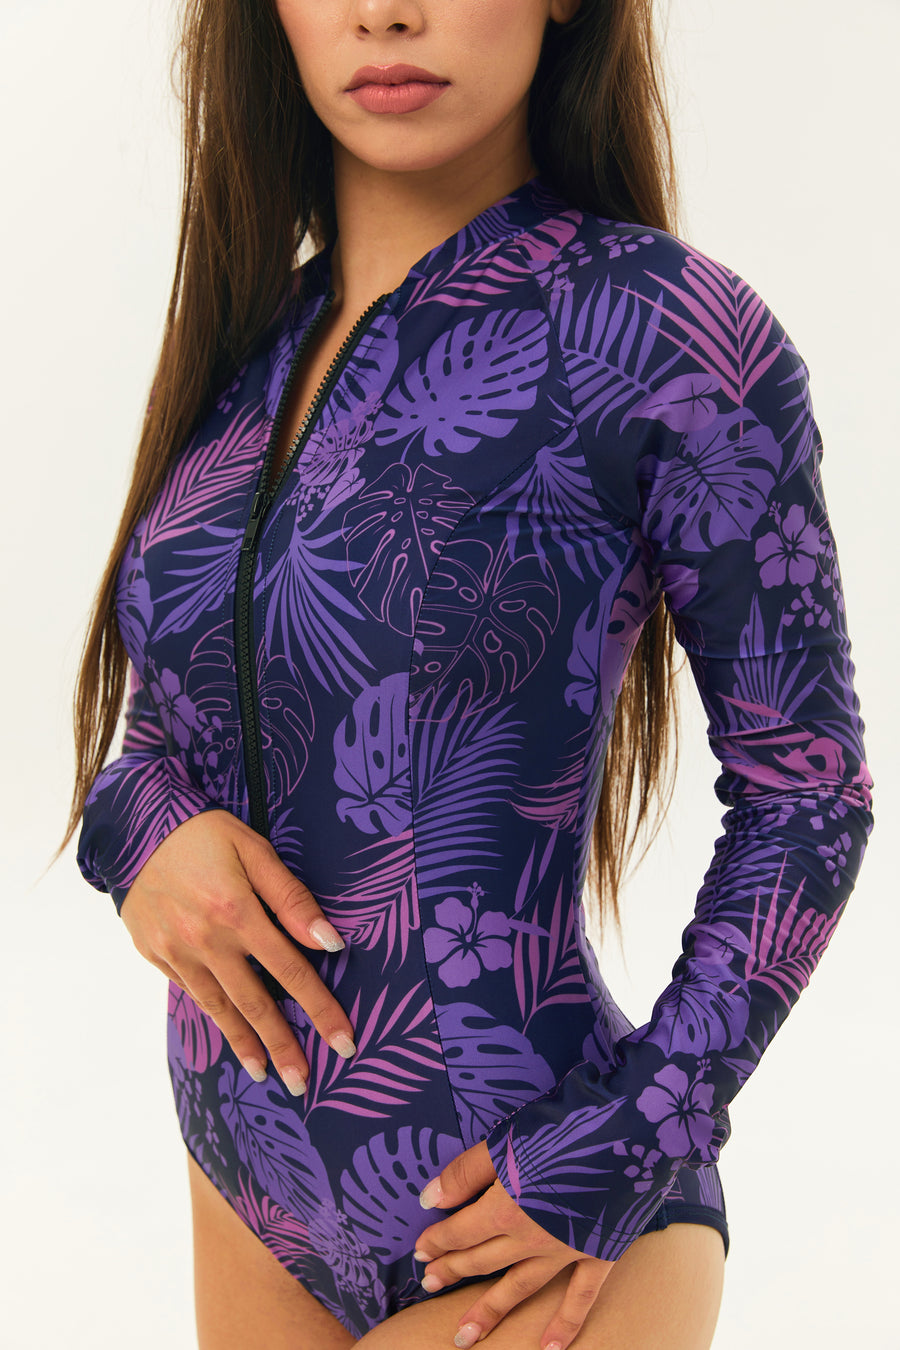 Jungle Fever Long Sleeve Swimsuit - SILVERWIND